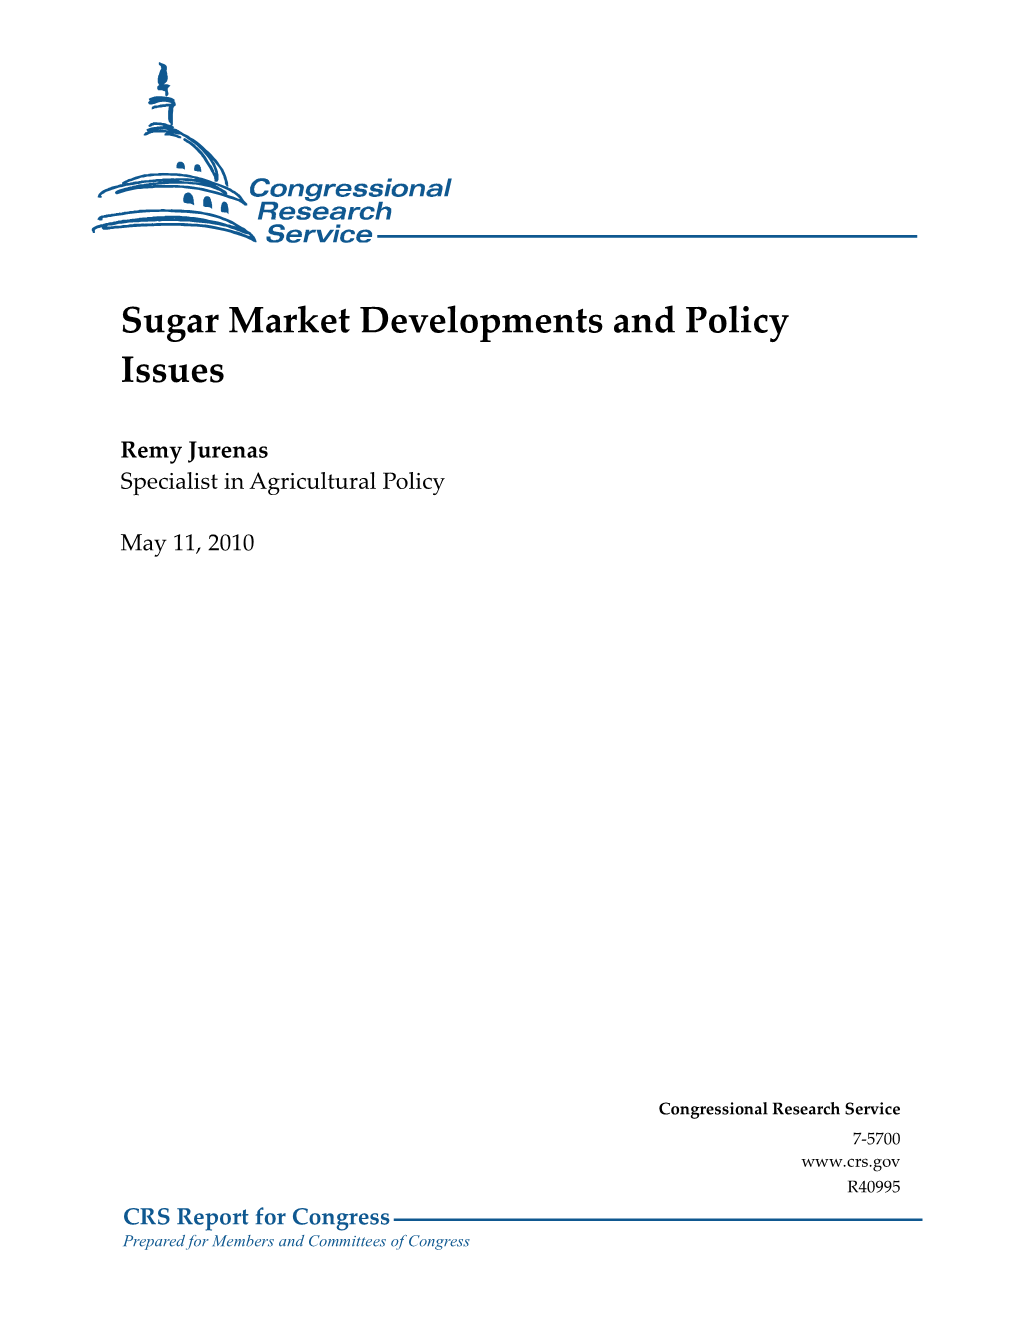 Sugar Market Developments and Policy Issues